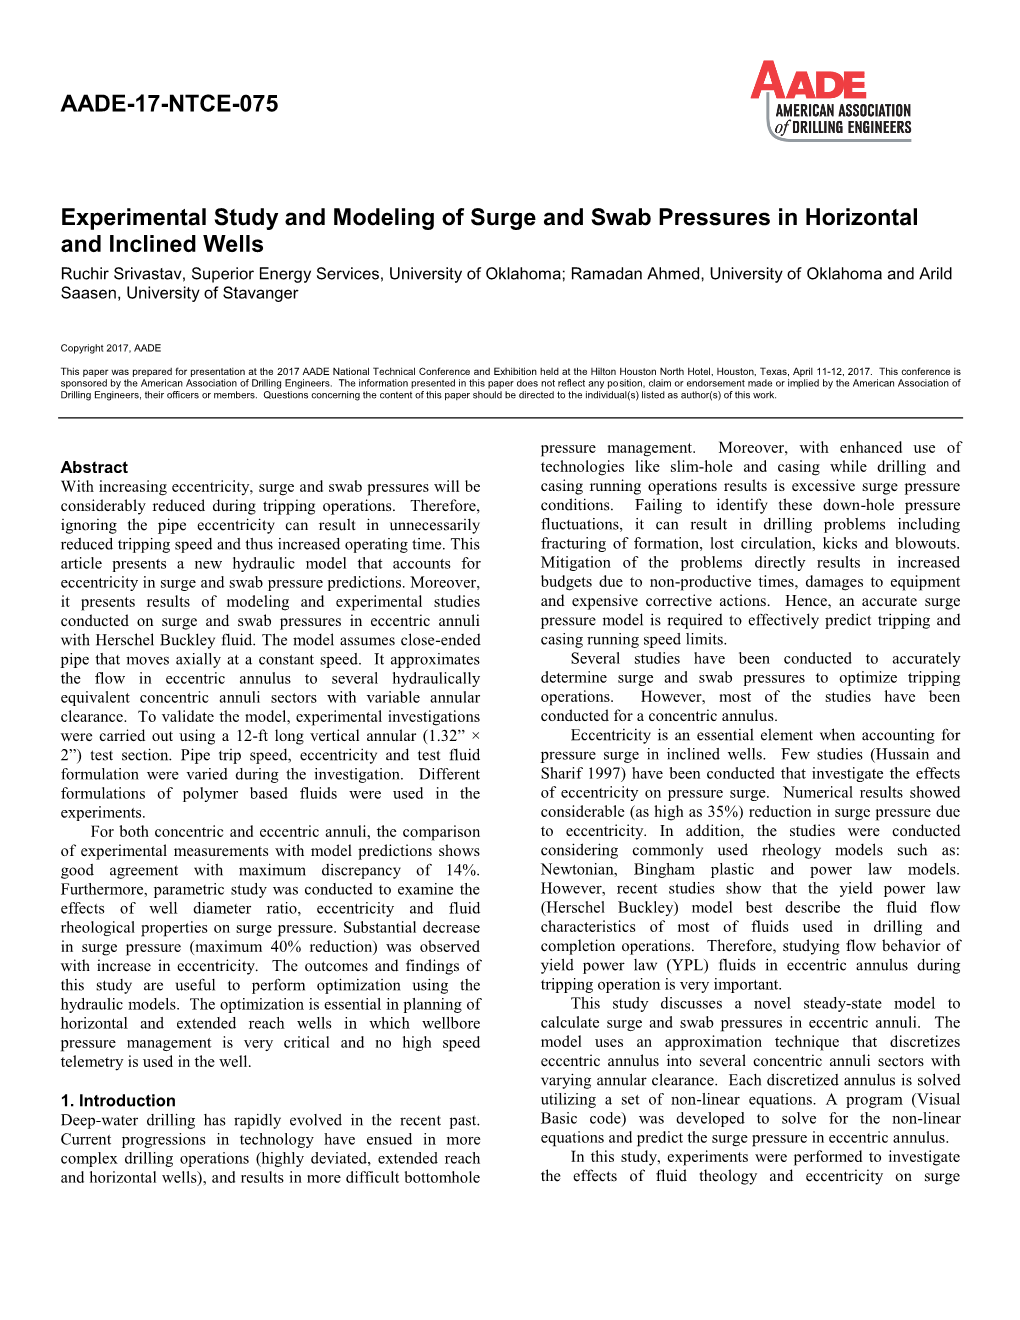 Experimental Study and Modeling of Surge and Swab